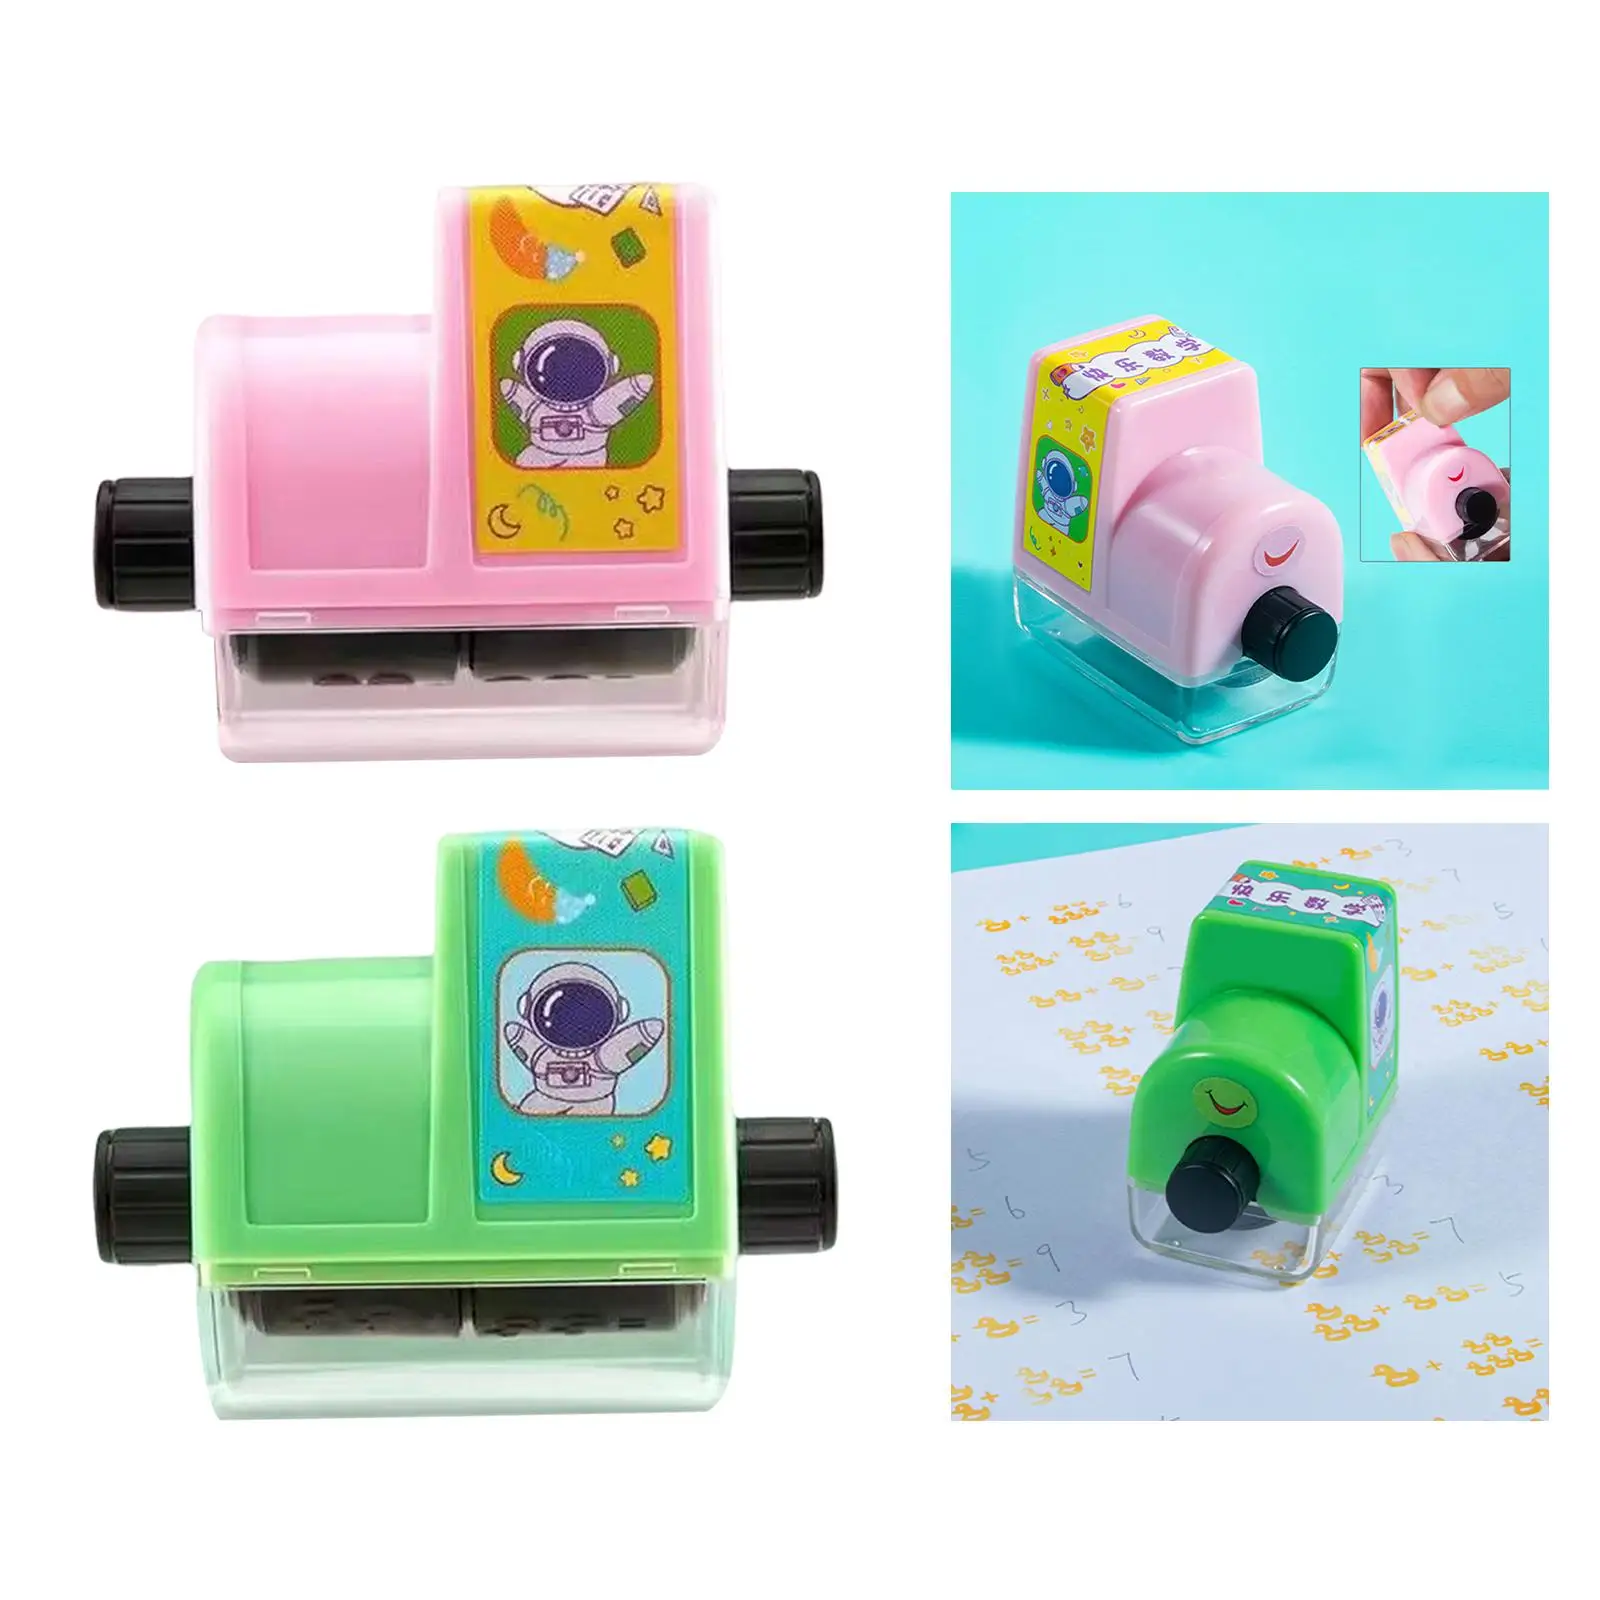 Reusable Math Learning Stamps Math Trainer Roller Stamp Learning Educational Toy Mathematics Learning Aids for Preschool Kids